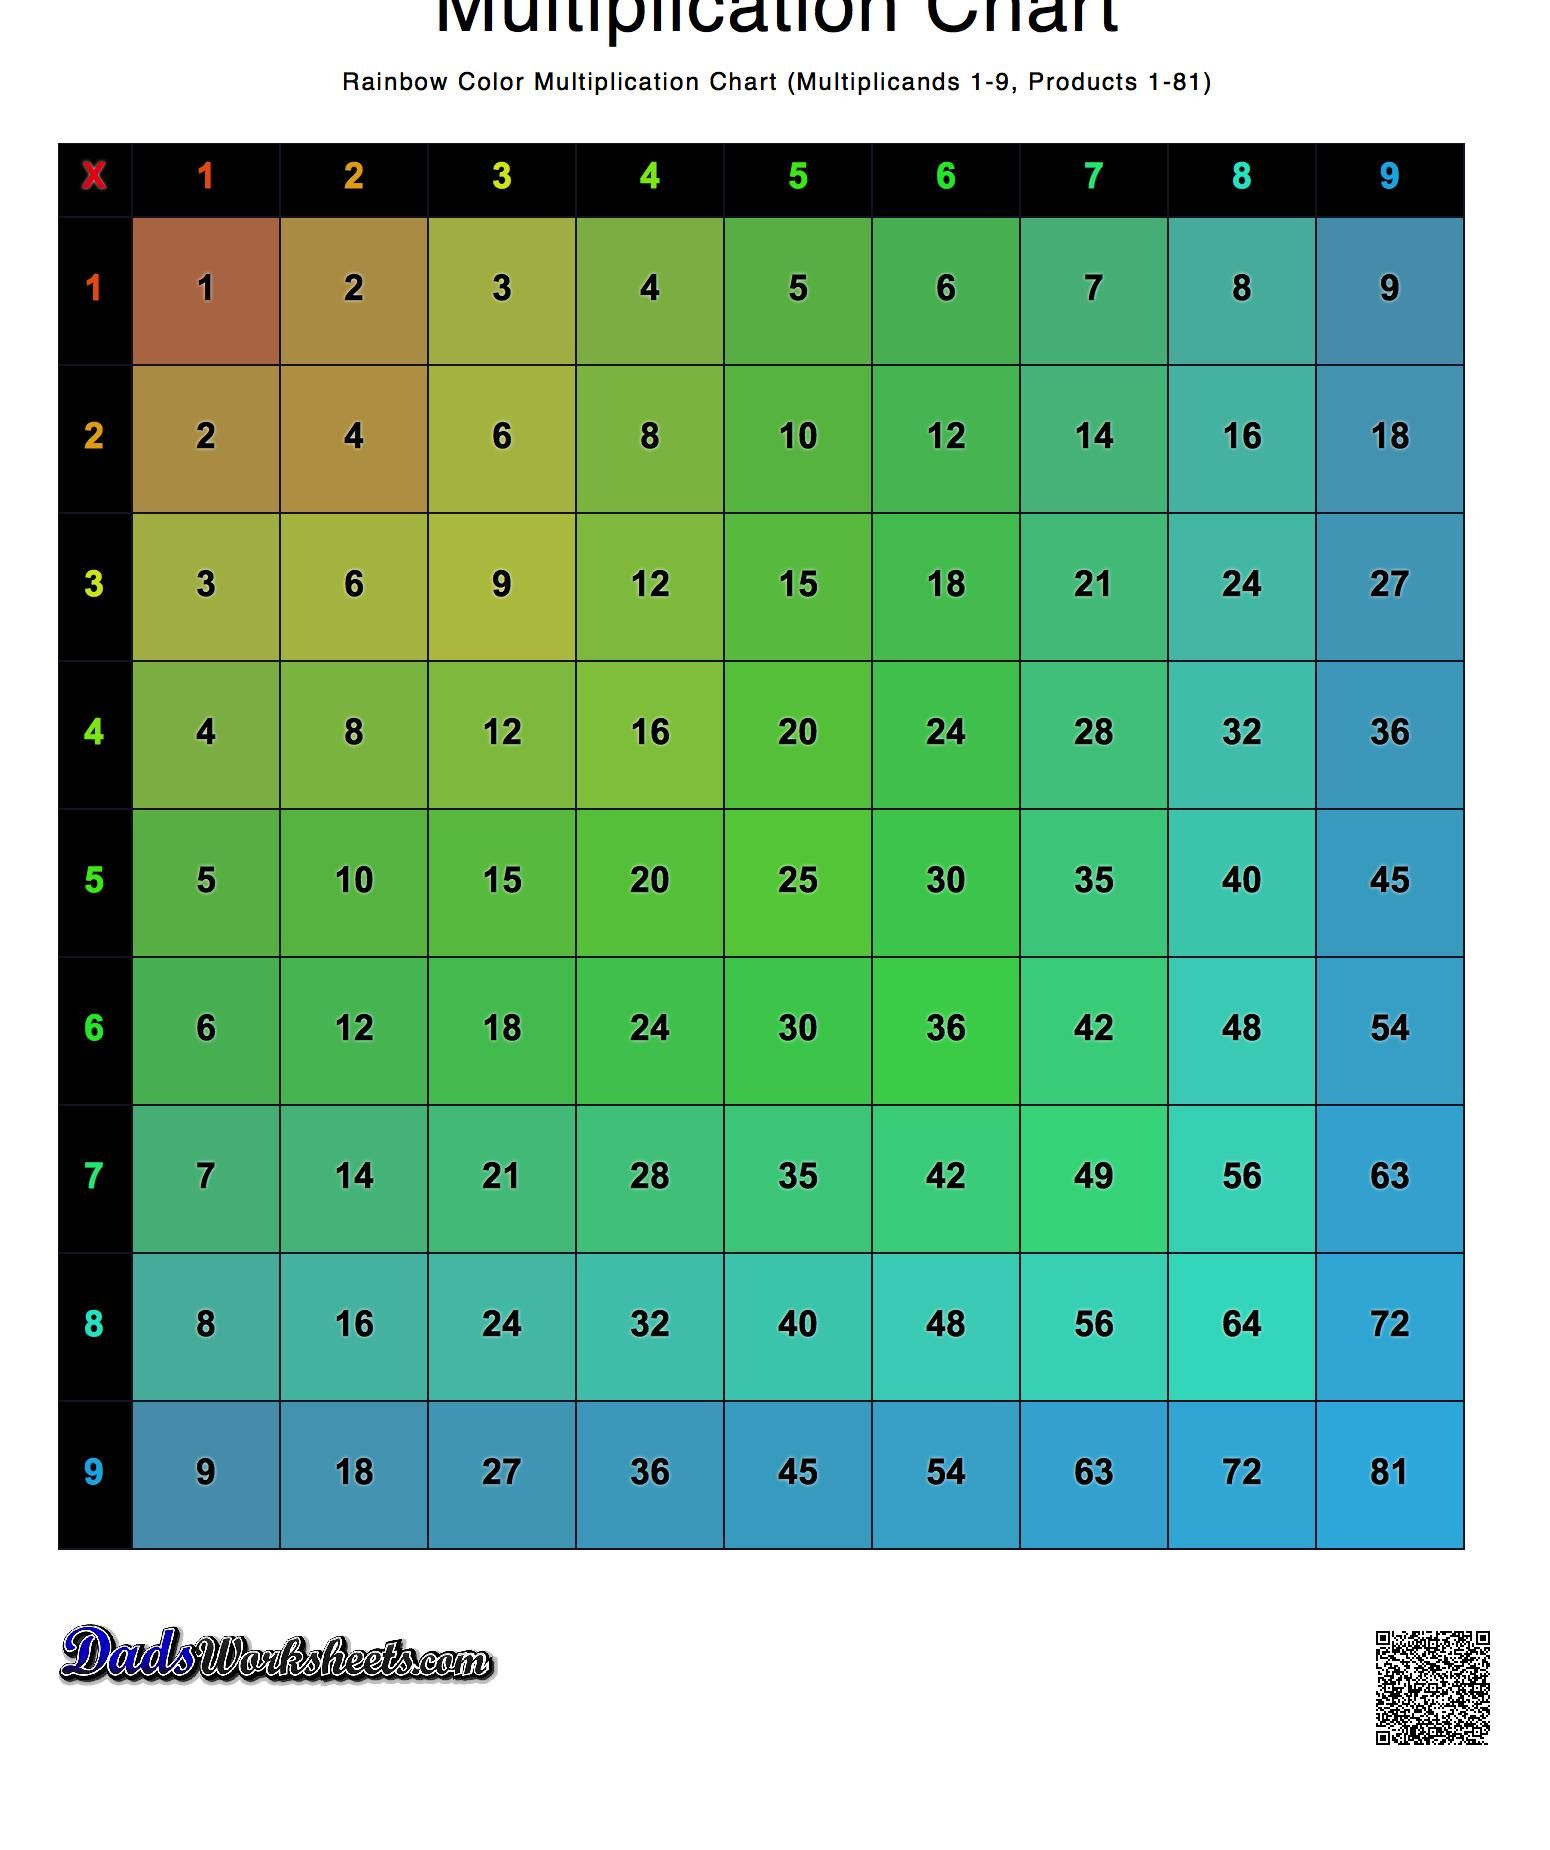 multiplication-charts-in-many-formats-including-facts-1-10-1-12-1-15-pin-on-what-am-i-doing